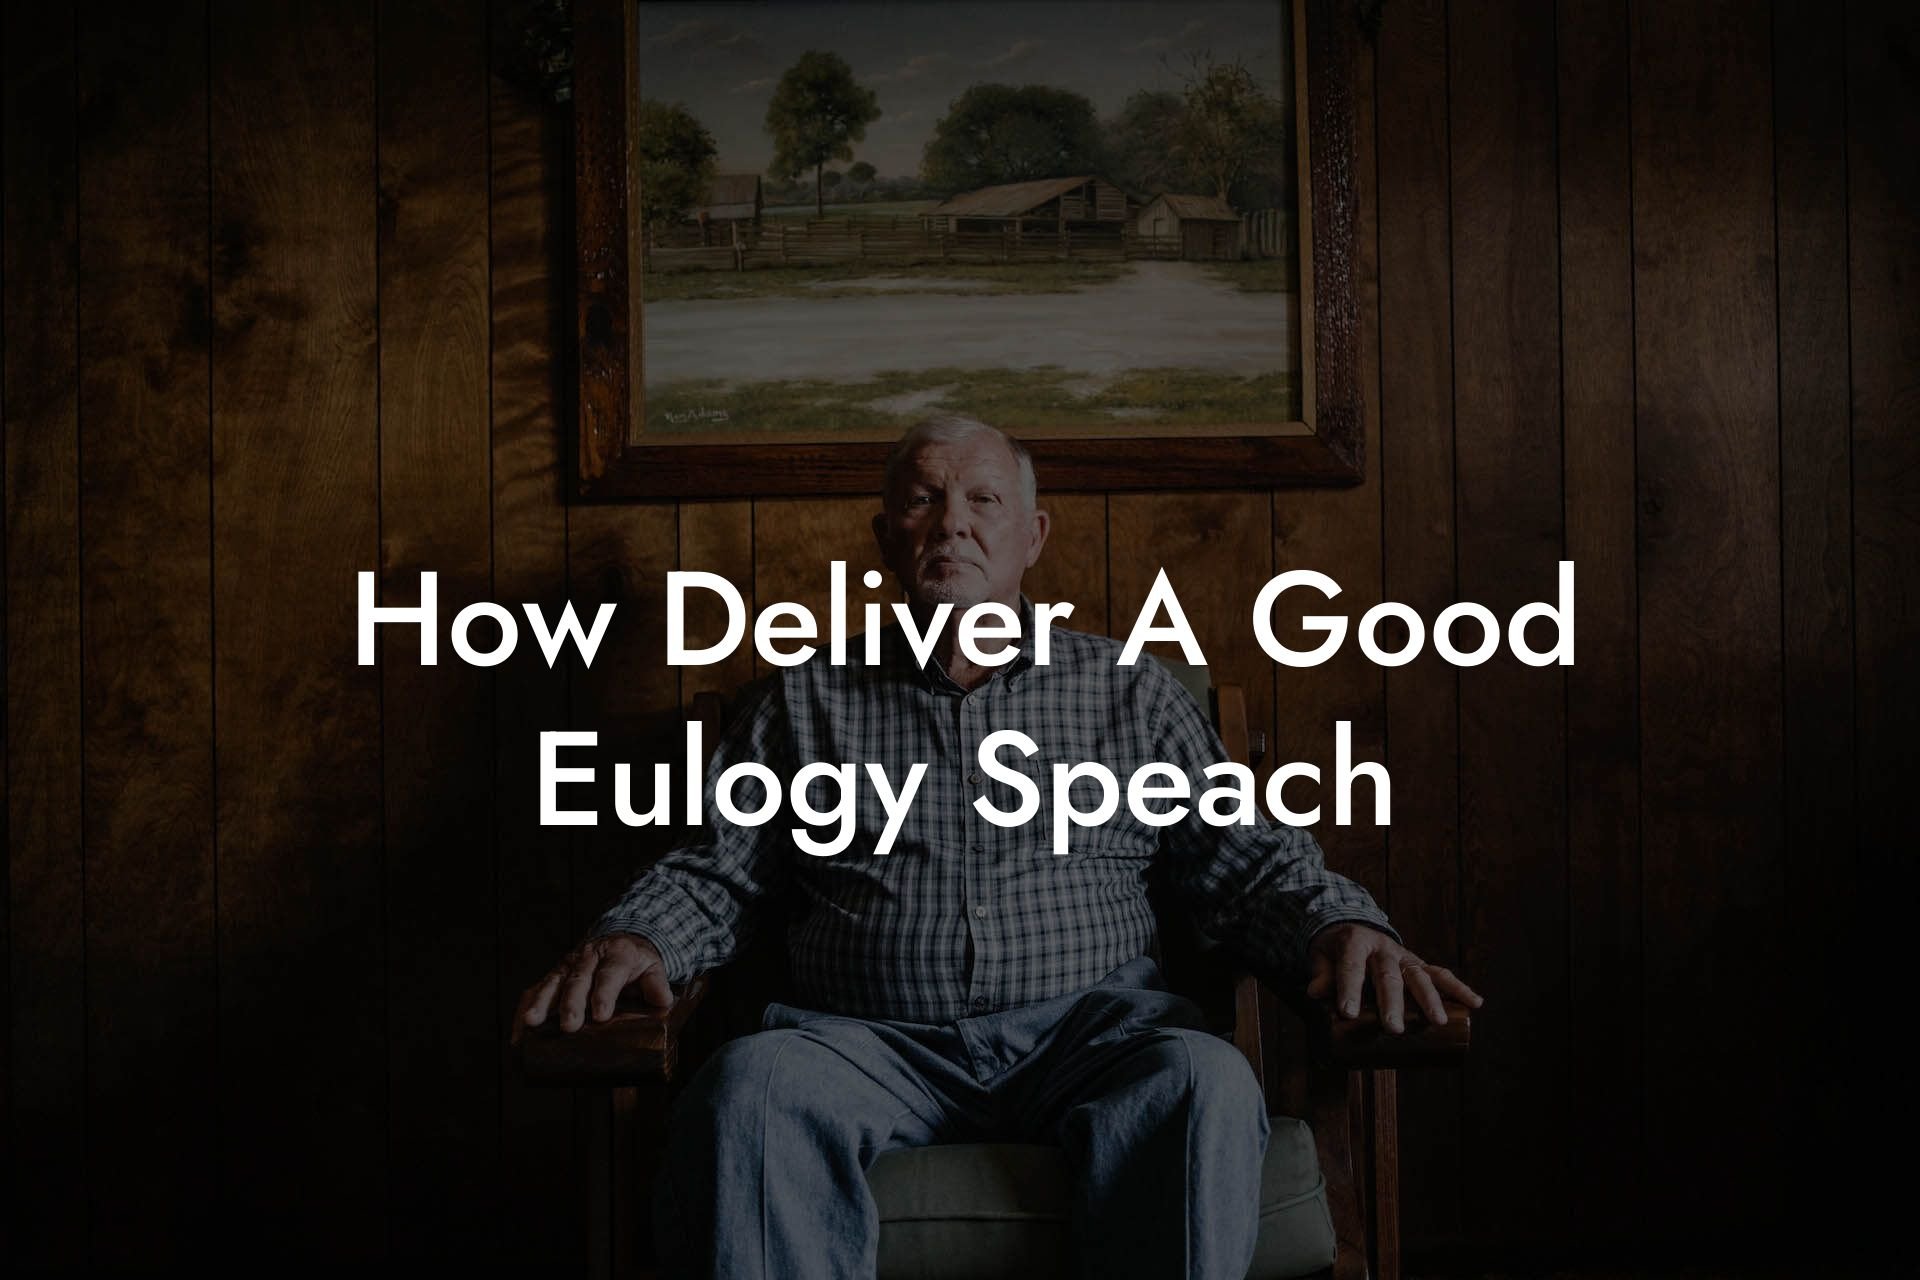 How Deliver A Good Eulogy Speach